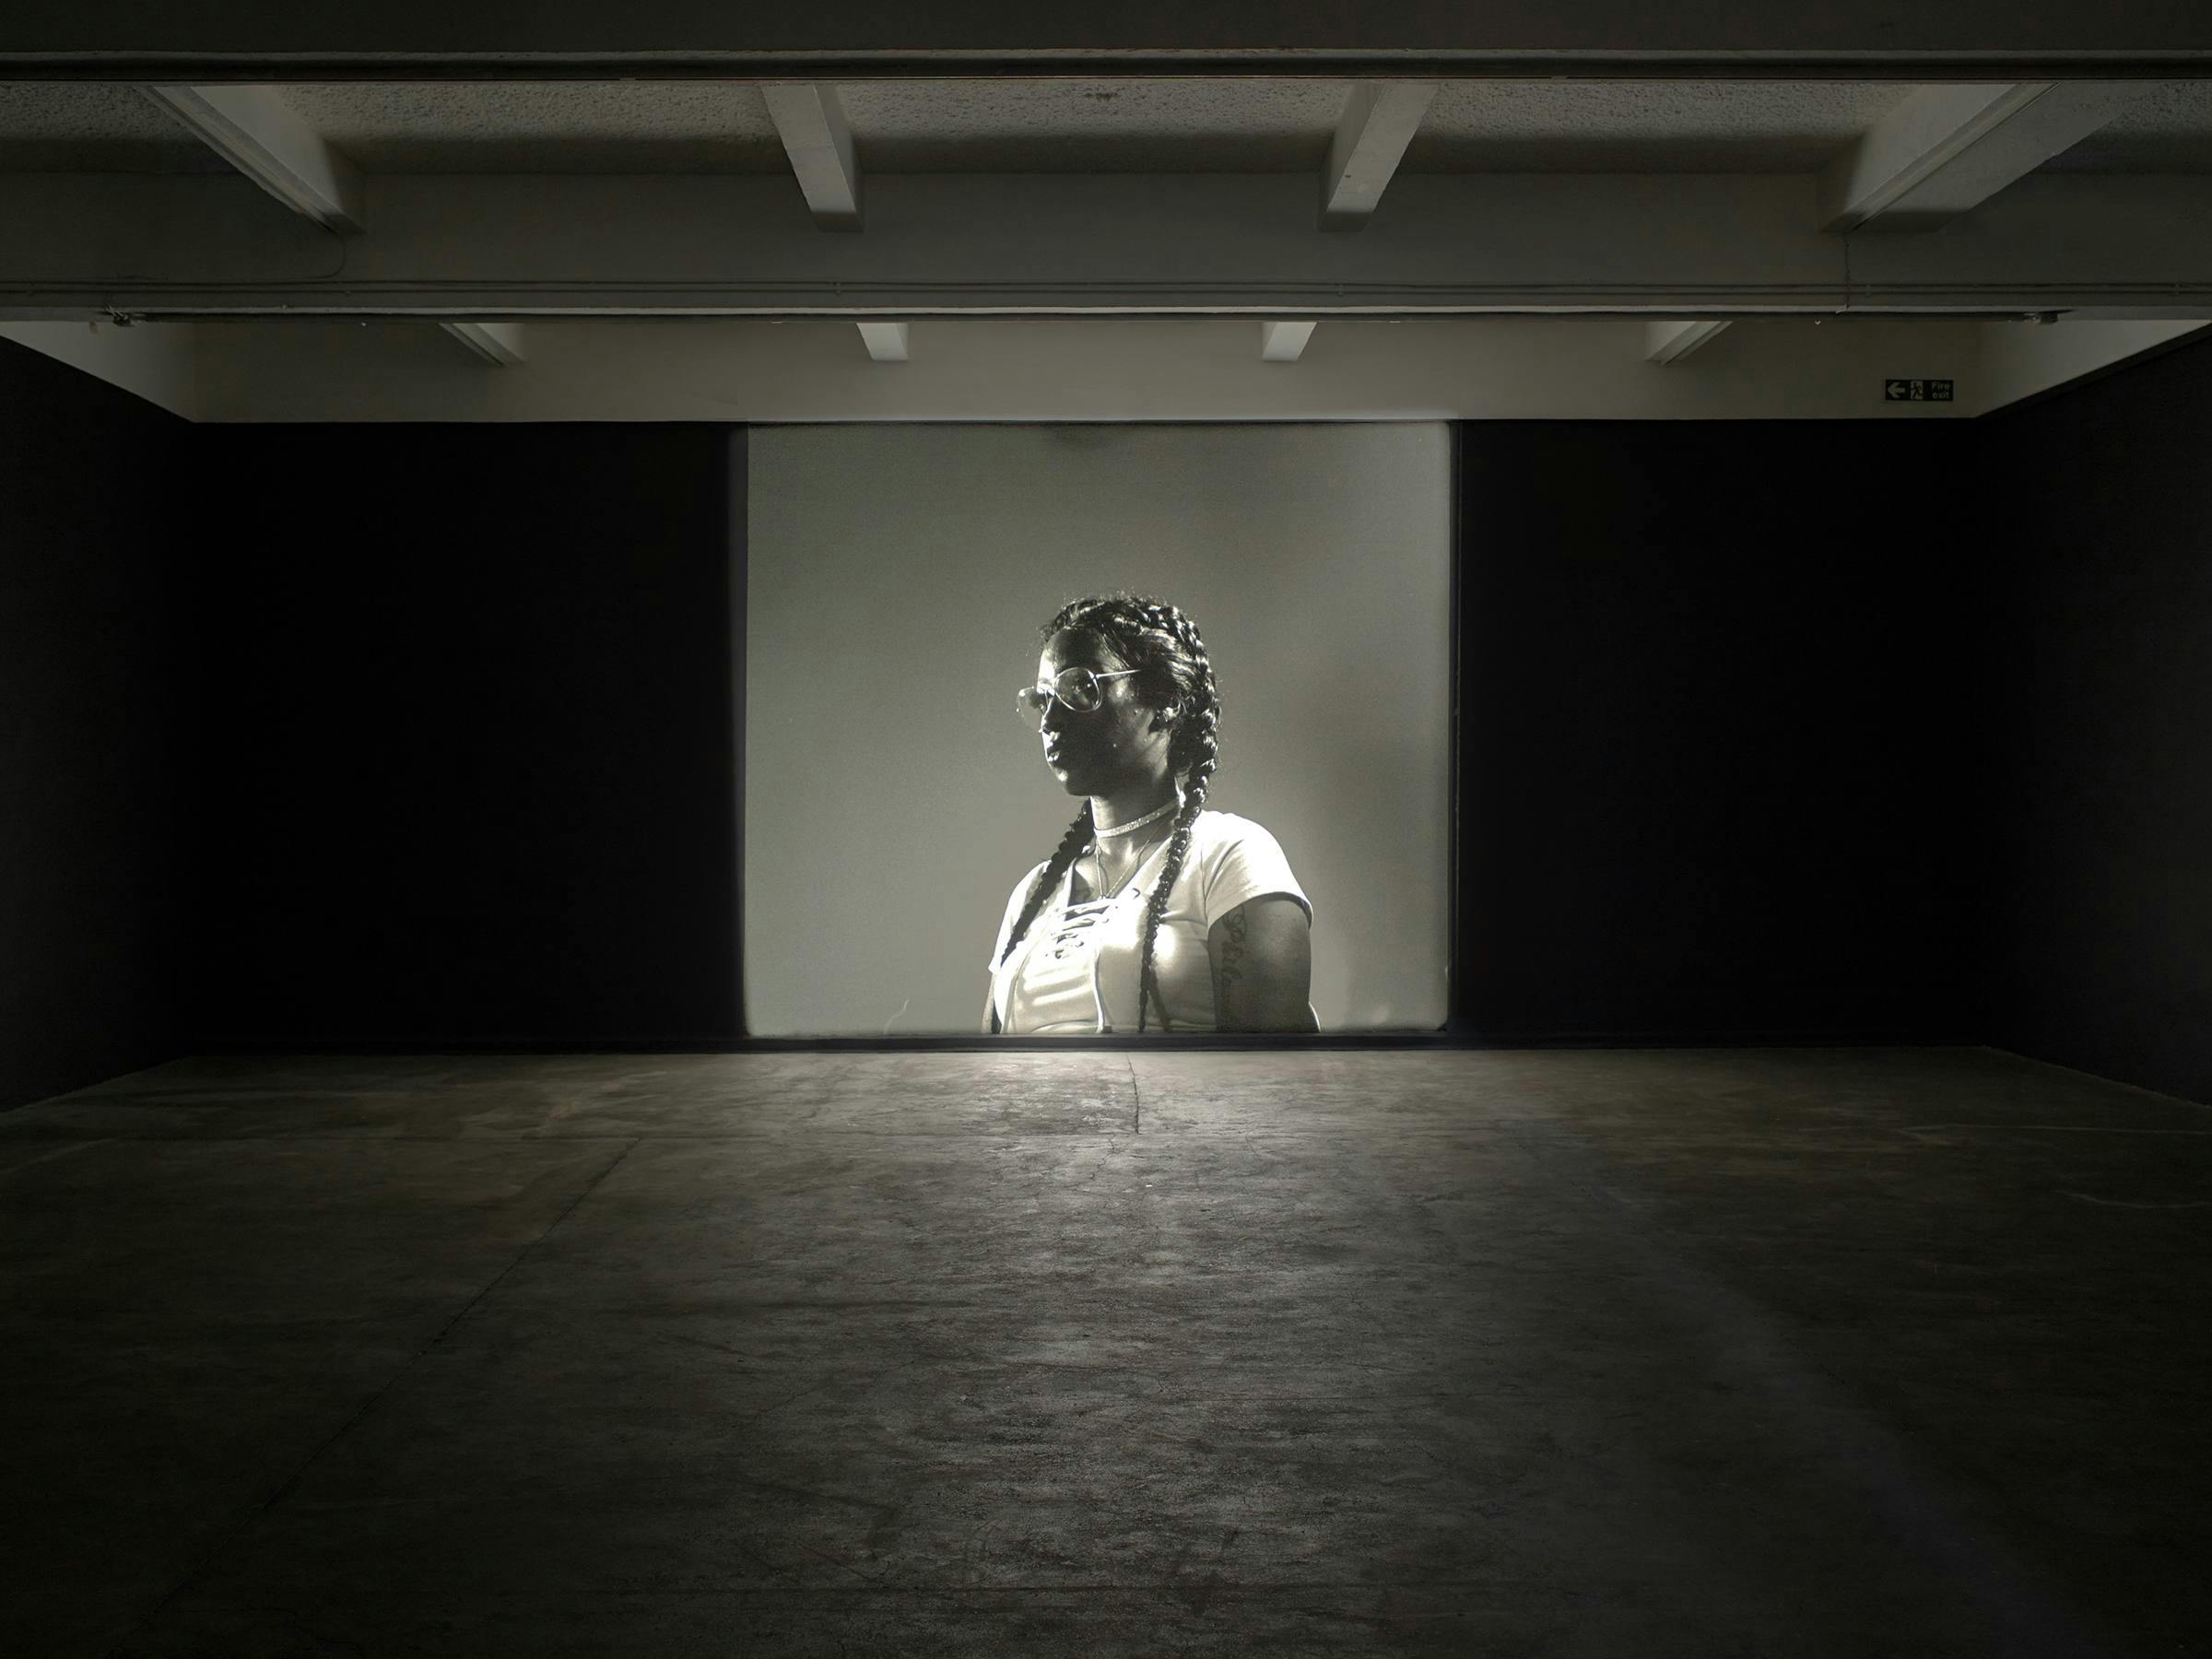 A video art work projected in a darkened space. The projected image is black and white and depicts a black woman wearing glasses and a white shirt at a 3 quarter length profile.